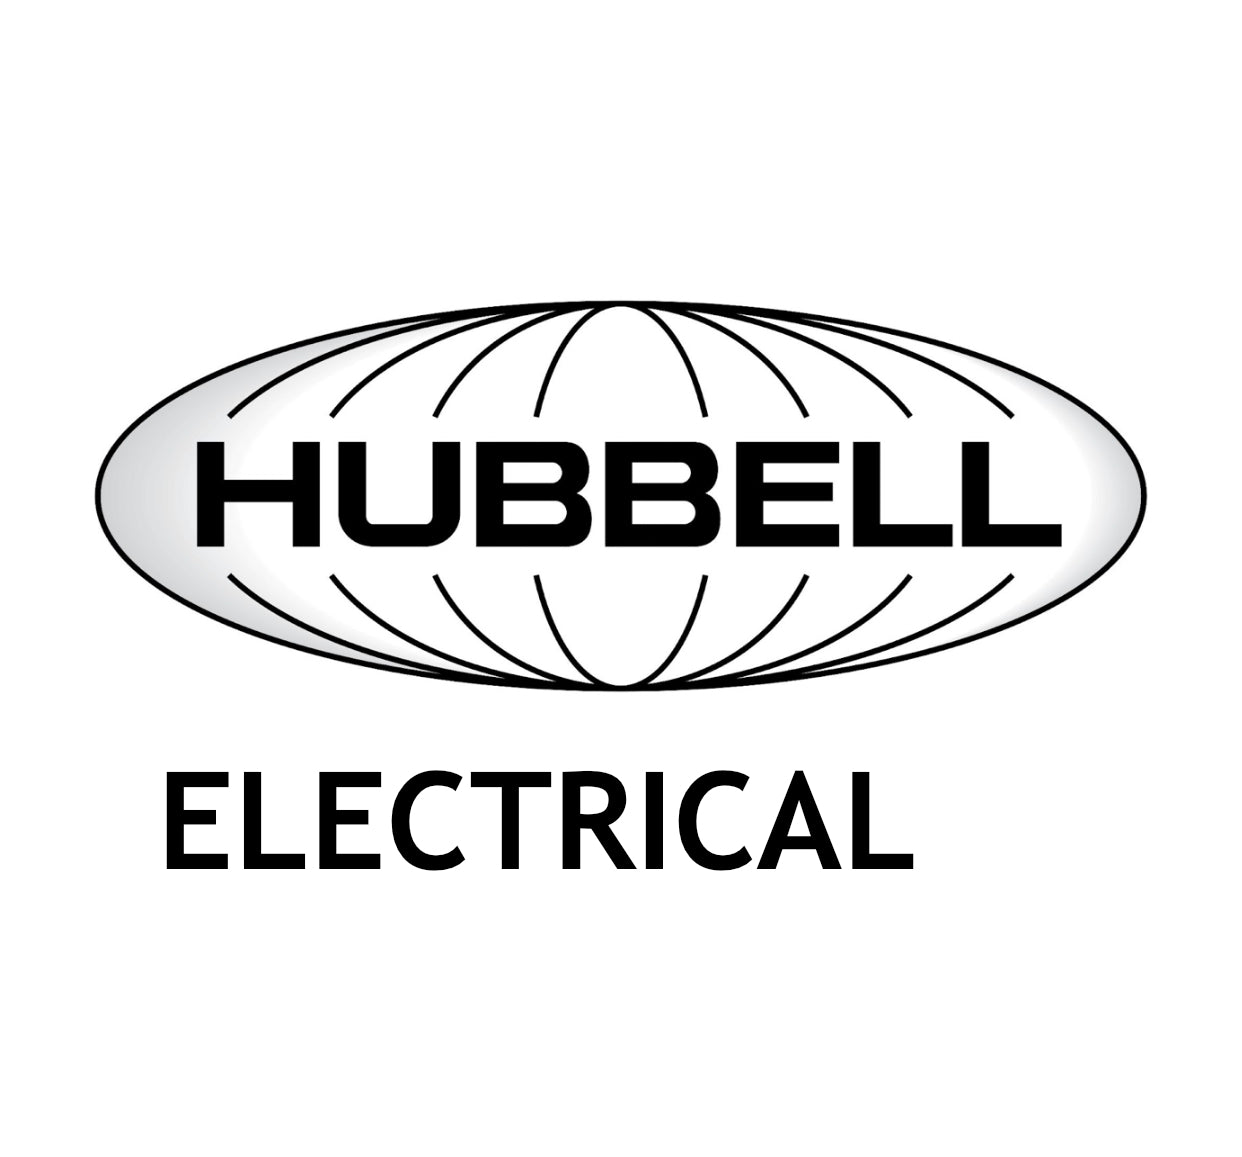 HUBBELL ELECTRICAL